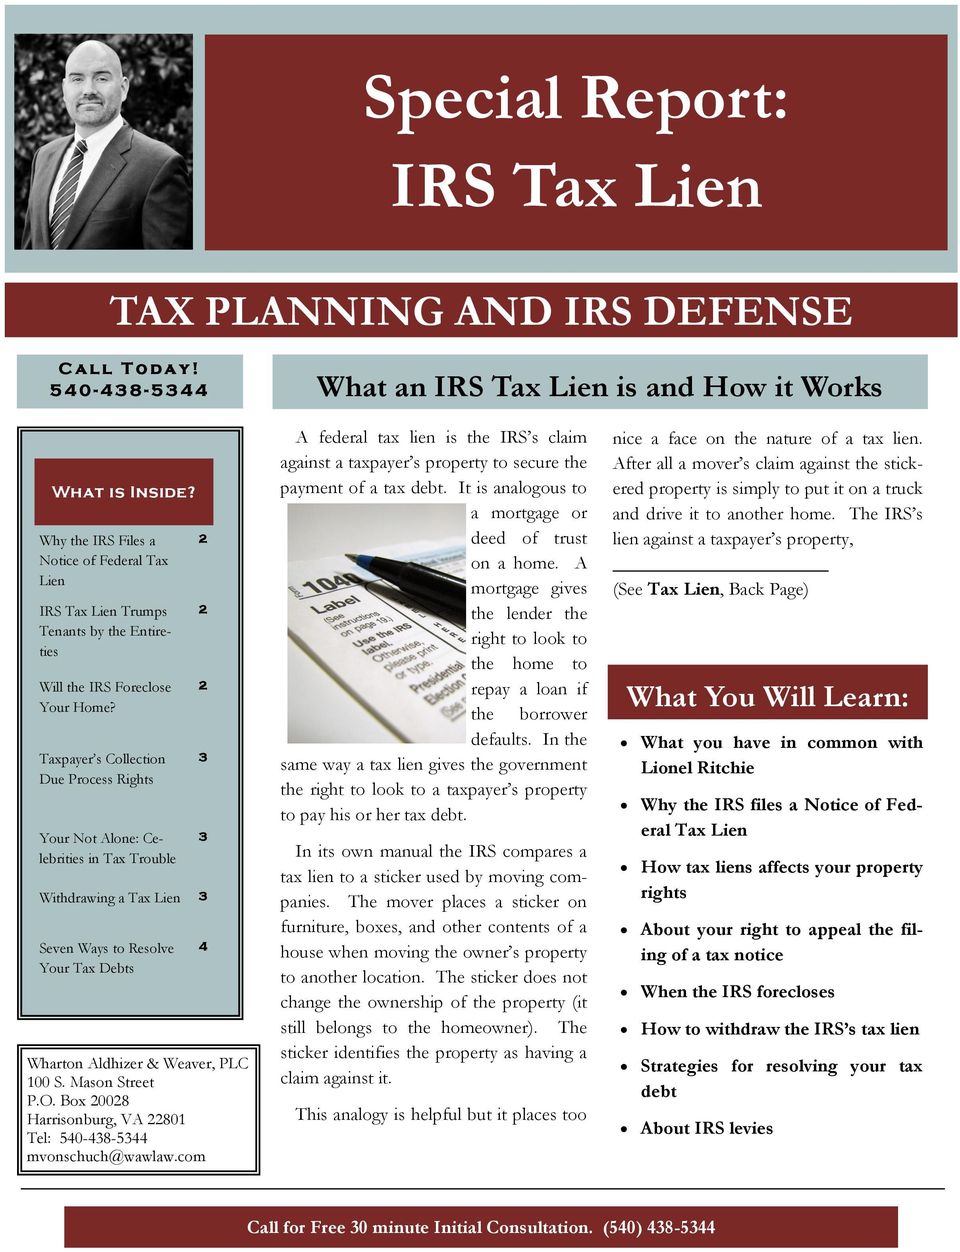 Taxpayer s Collection Due Process Rights Your Not Alone: Celebrities in Tax Trouble 2 2 2 3 3 Withdrawing a Tax Lien 3 Seven Ways to Resolve Your Tax Debts Wharton Aldhizer & Weaver, PLC 100 S.